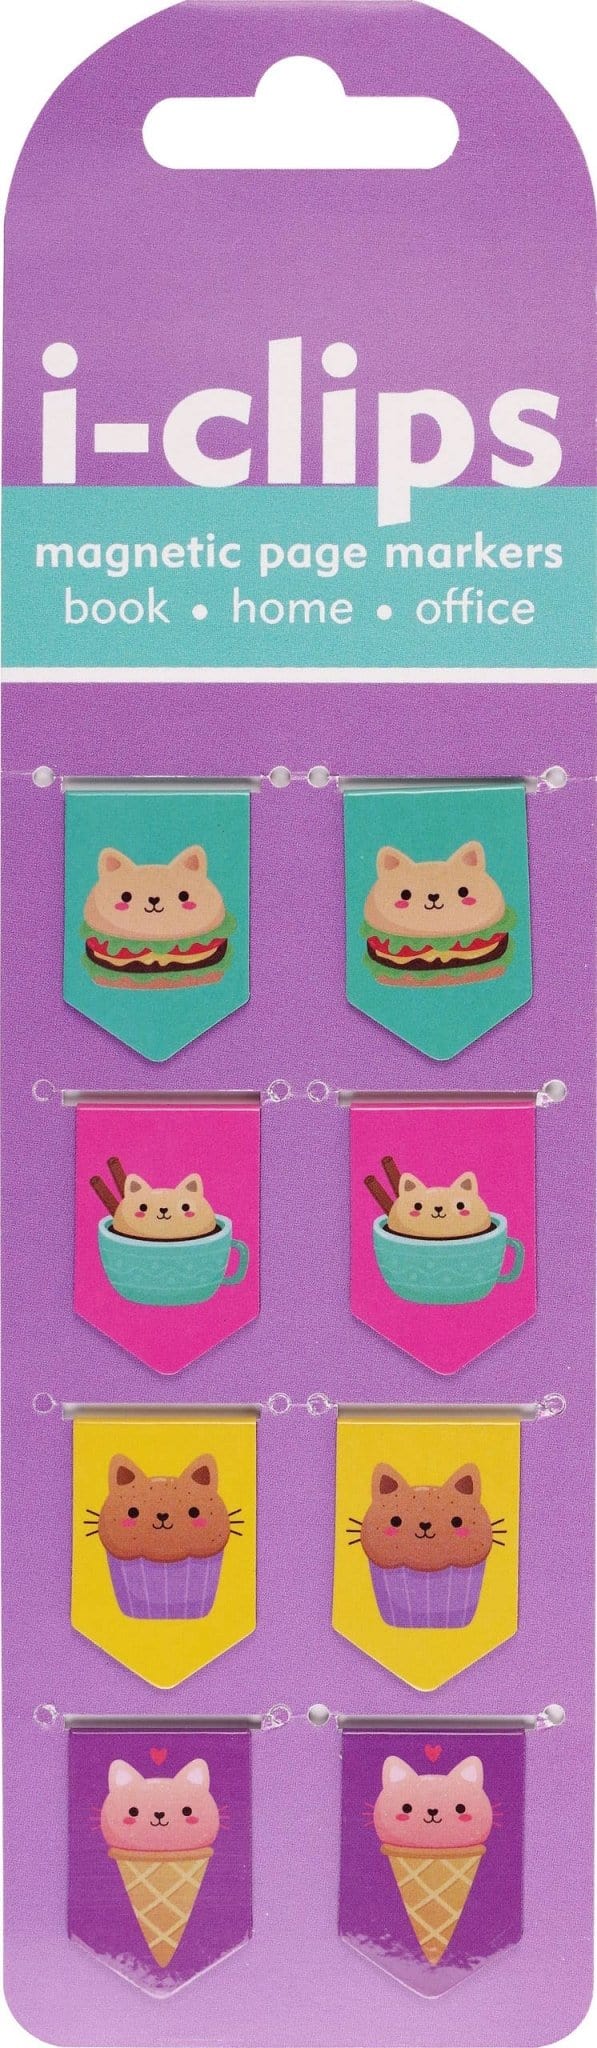 Bookmarks Kawaii Cats i-clips Magnetic Page Markers 9781441338372